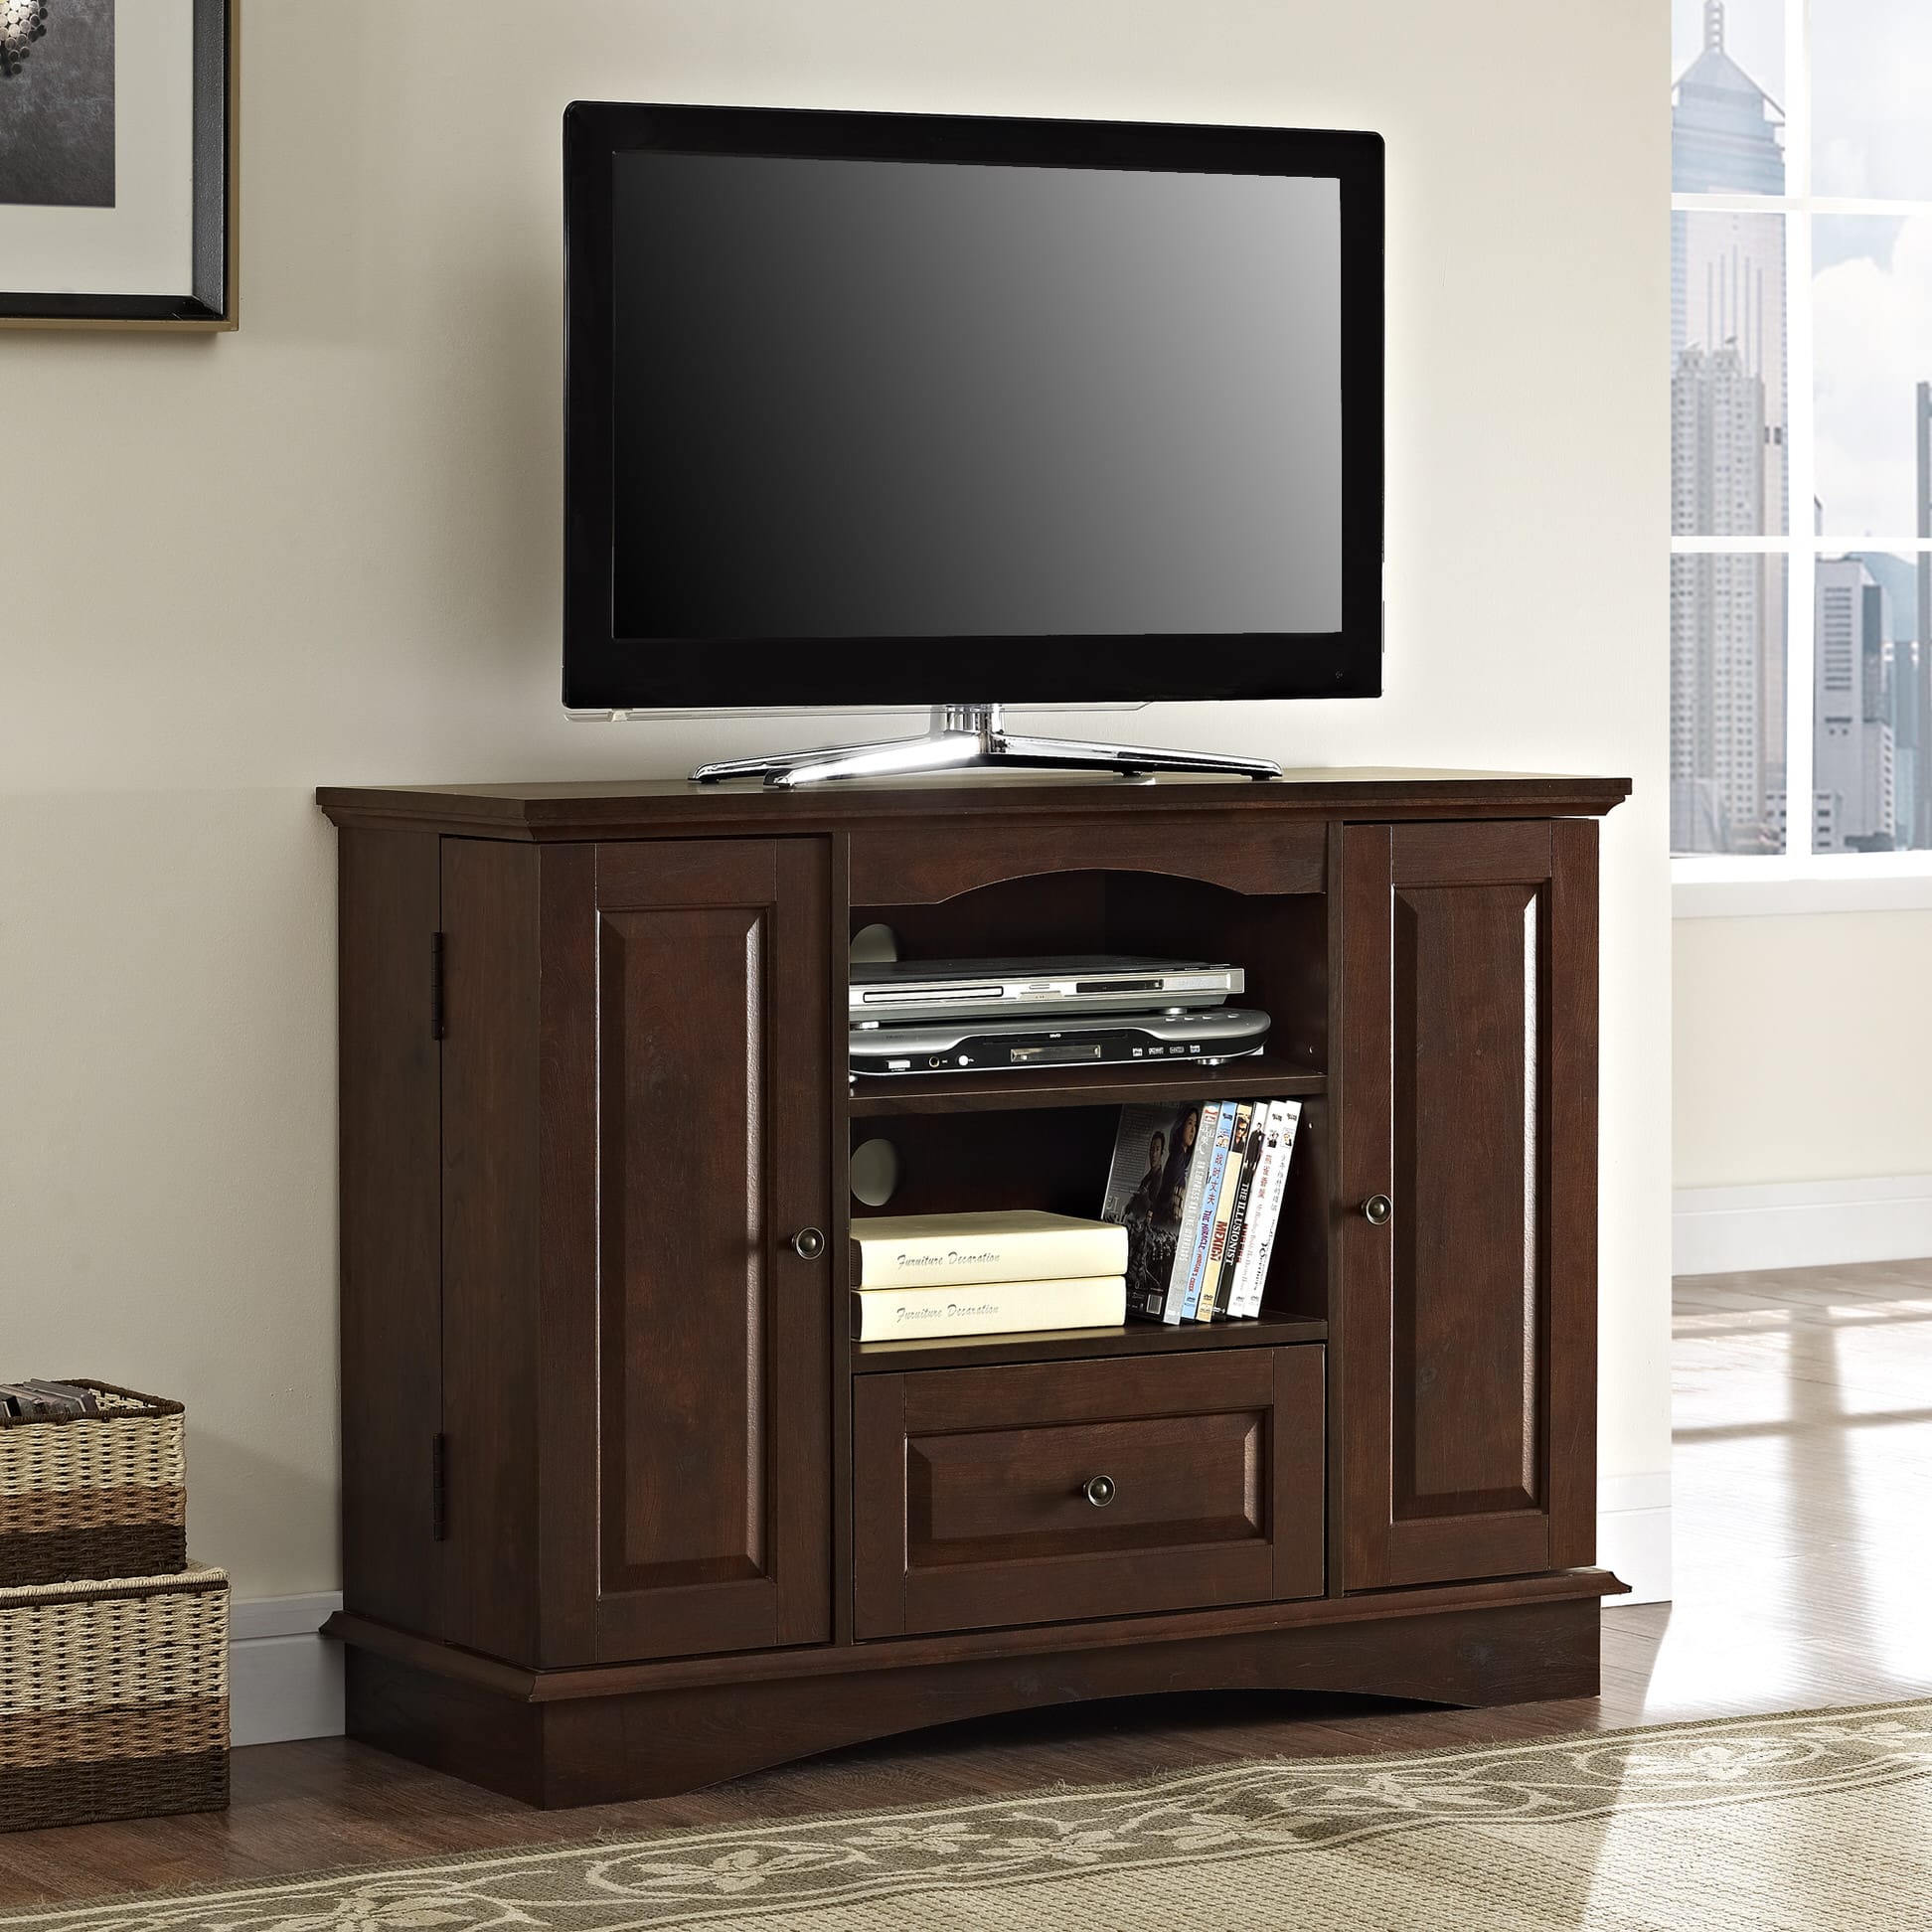 Highboy 42 Inch TV Stand - Brown by Walker Edison